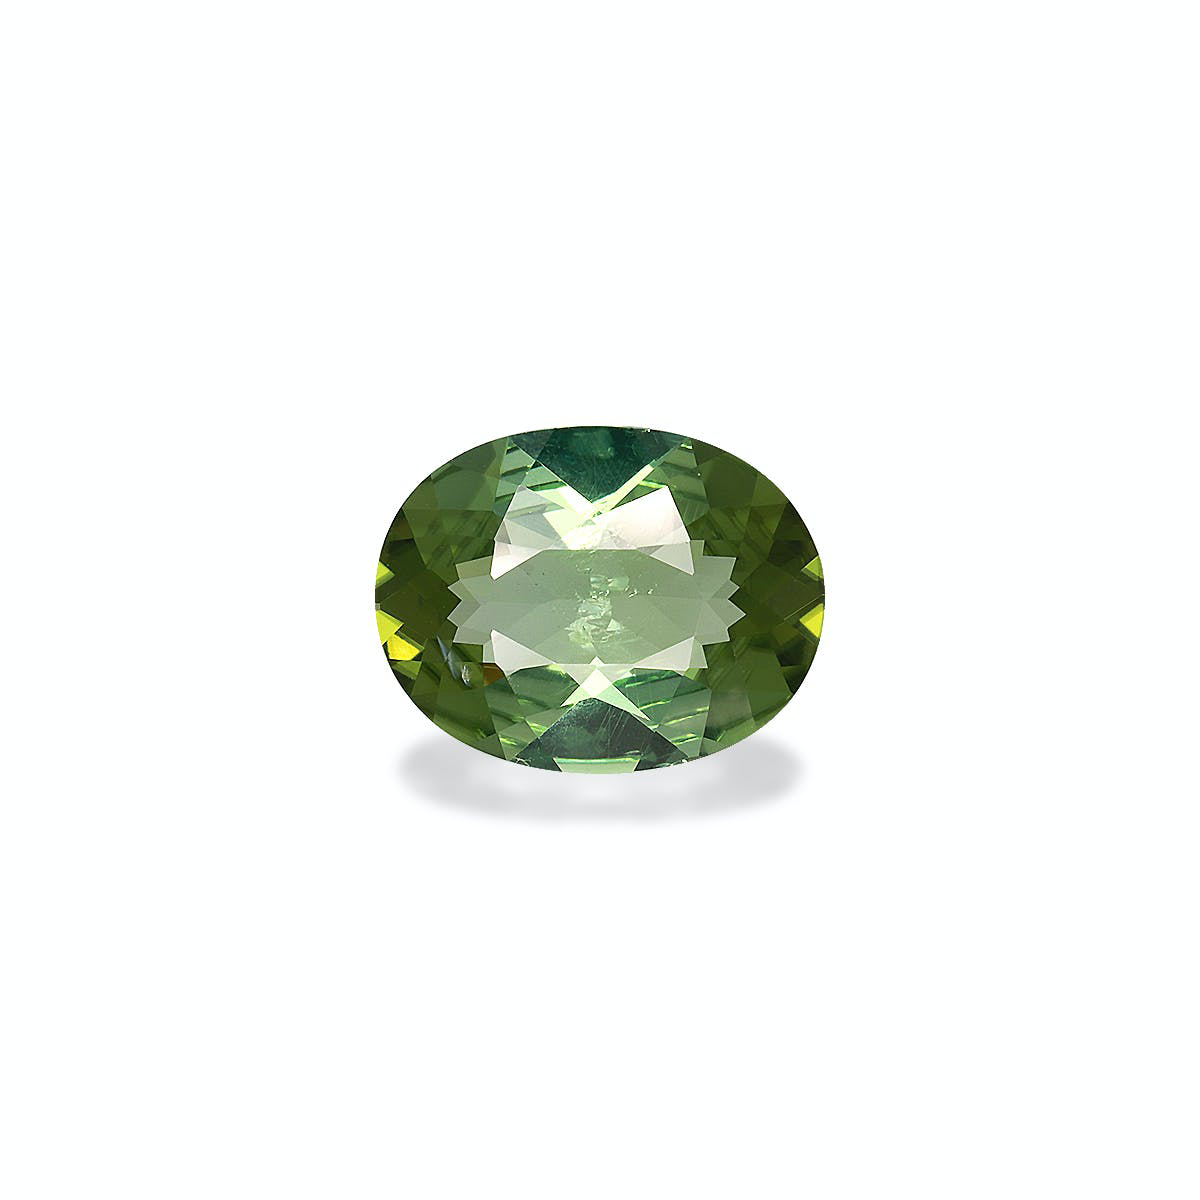 Picture of Pistachio Green Tourmaline 4.55ct (TG0699)